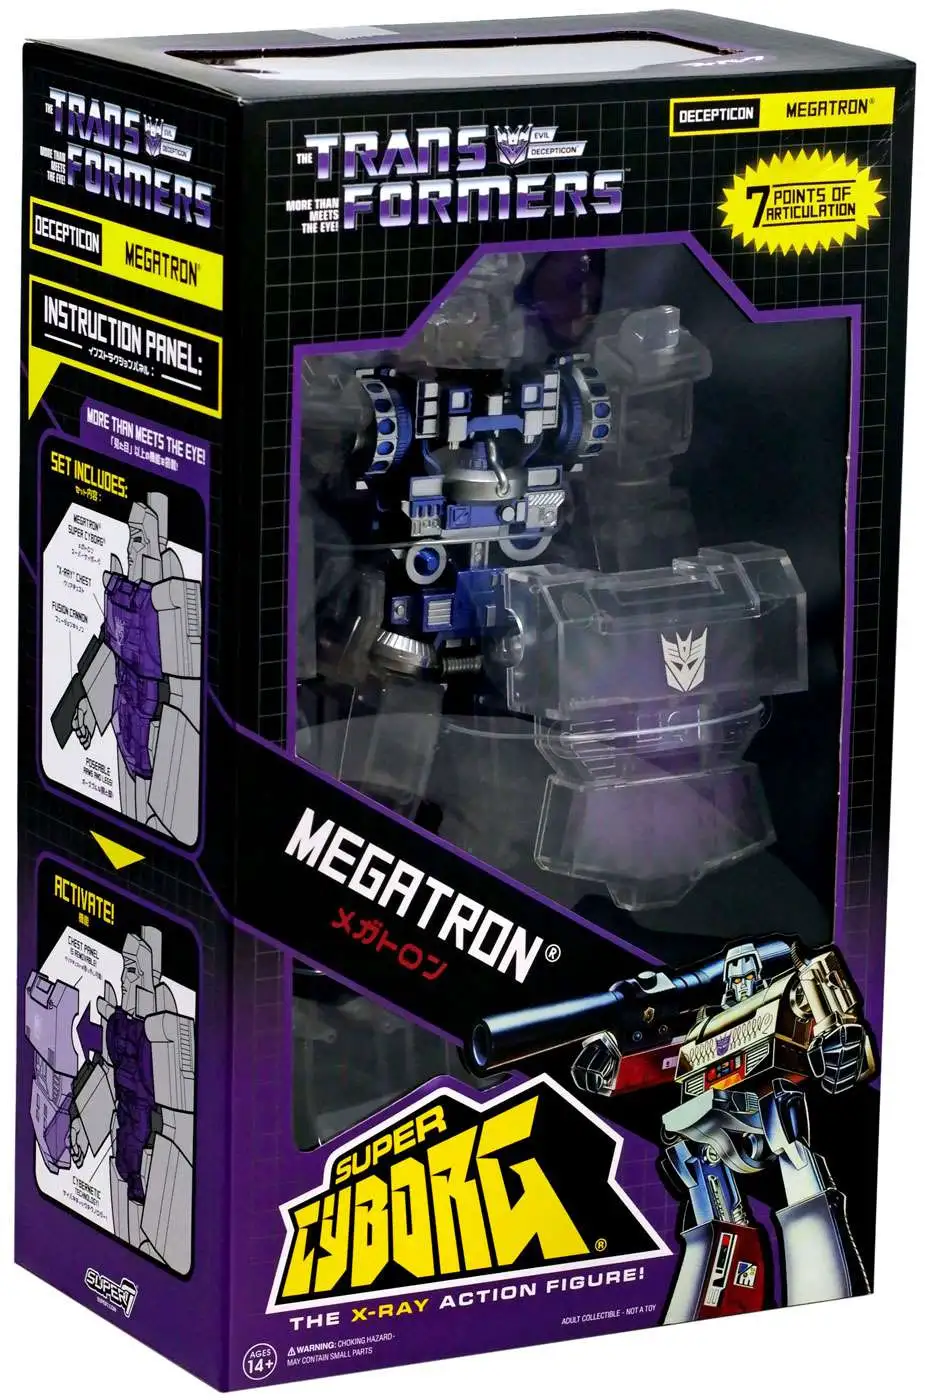 Details about   Megatron Super Cyborg Super 7 12 inch Cartoon X-Ray Articulated Figure 